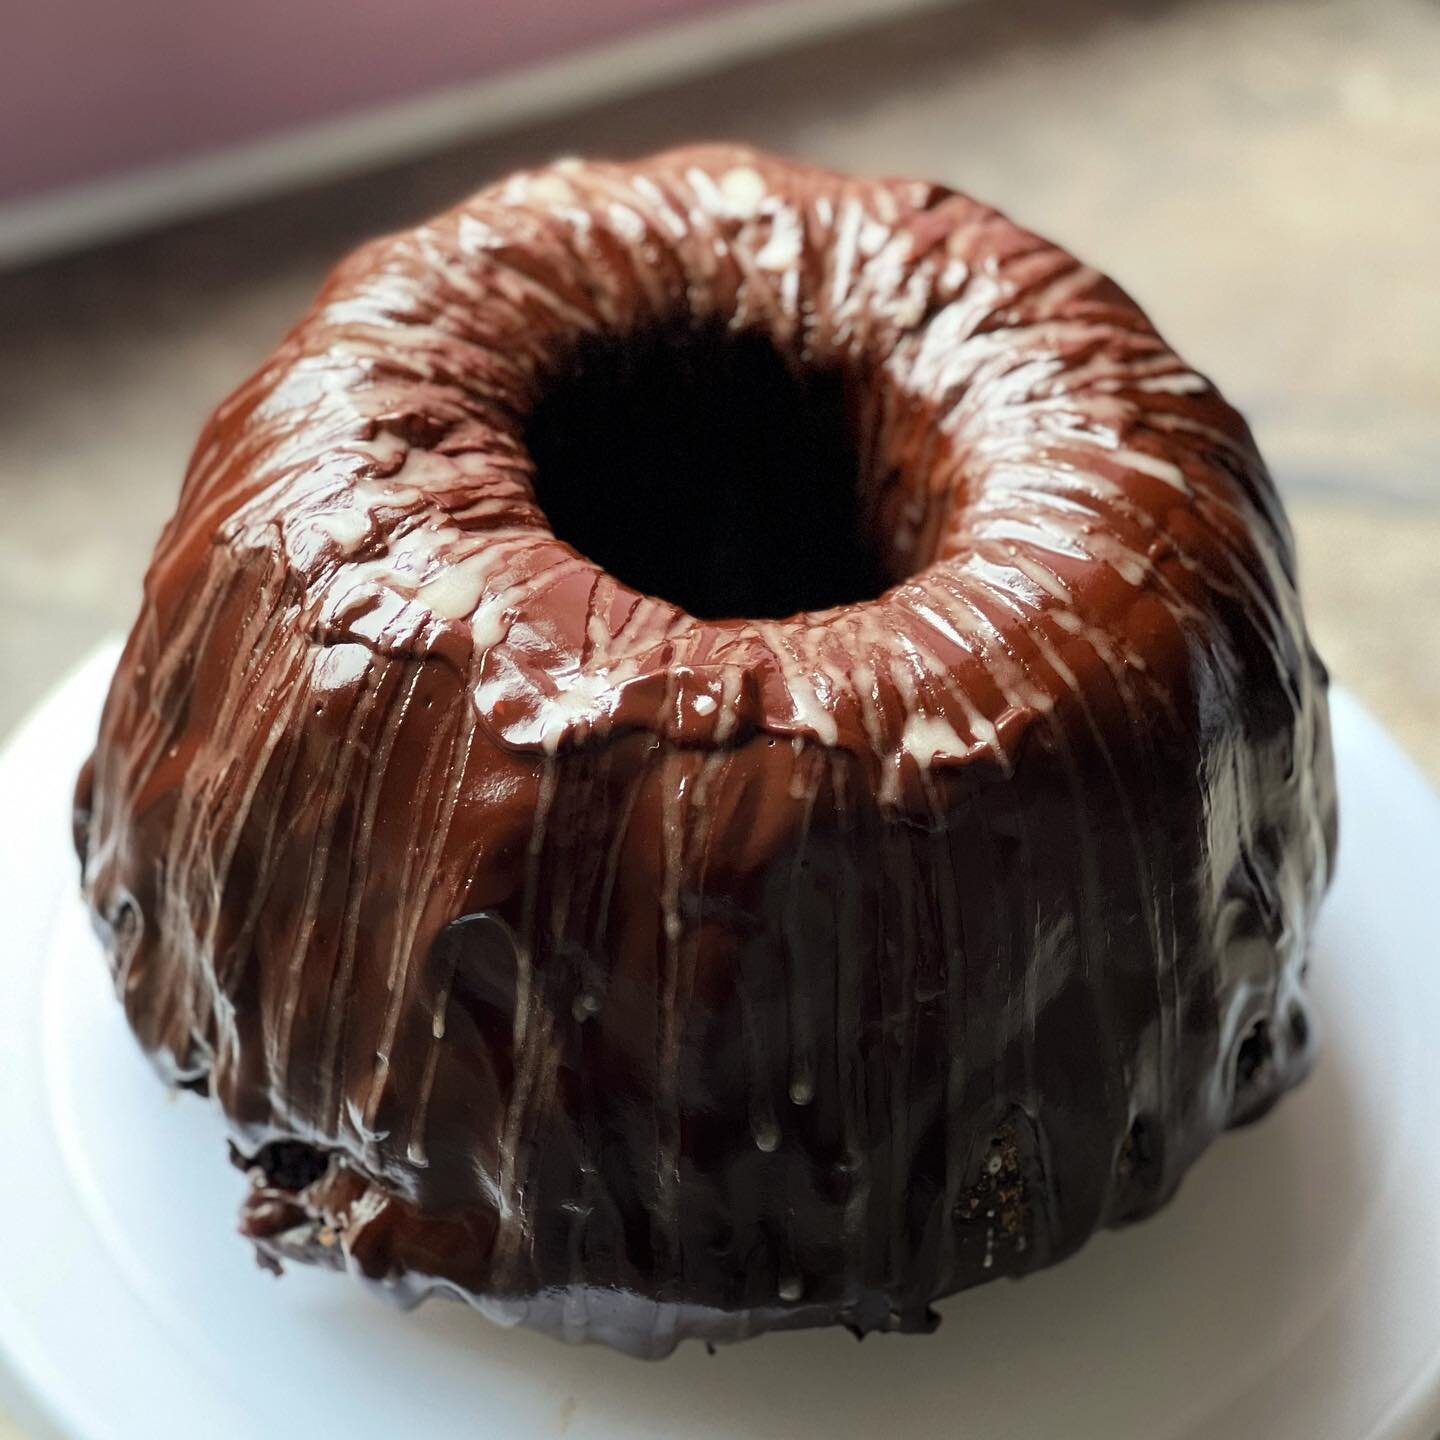 Deep chocolate Bundt cake with a mint choc ganache aka Mint Choc Bumhole 🍩 There&rsquo;s a story to this one 👉 The recipe was given to me by my friend @cinimon_centric (who is an artist and who I met on Insta!). And it was delicious. Incidentally e